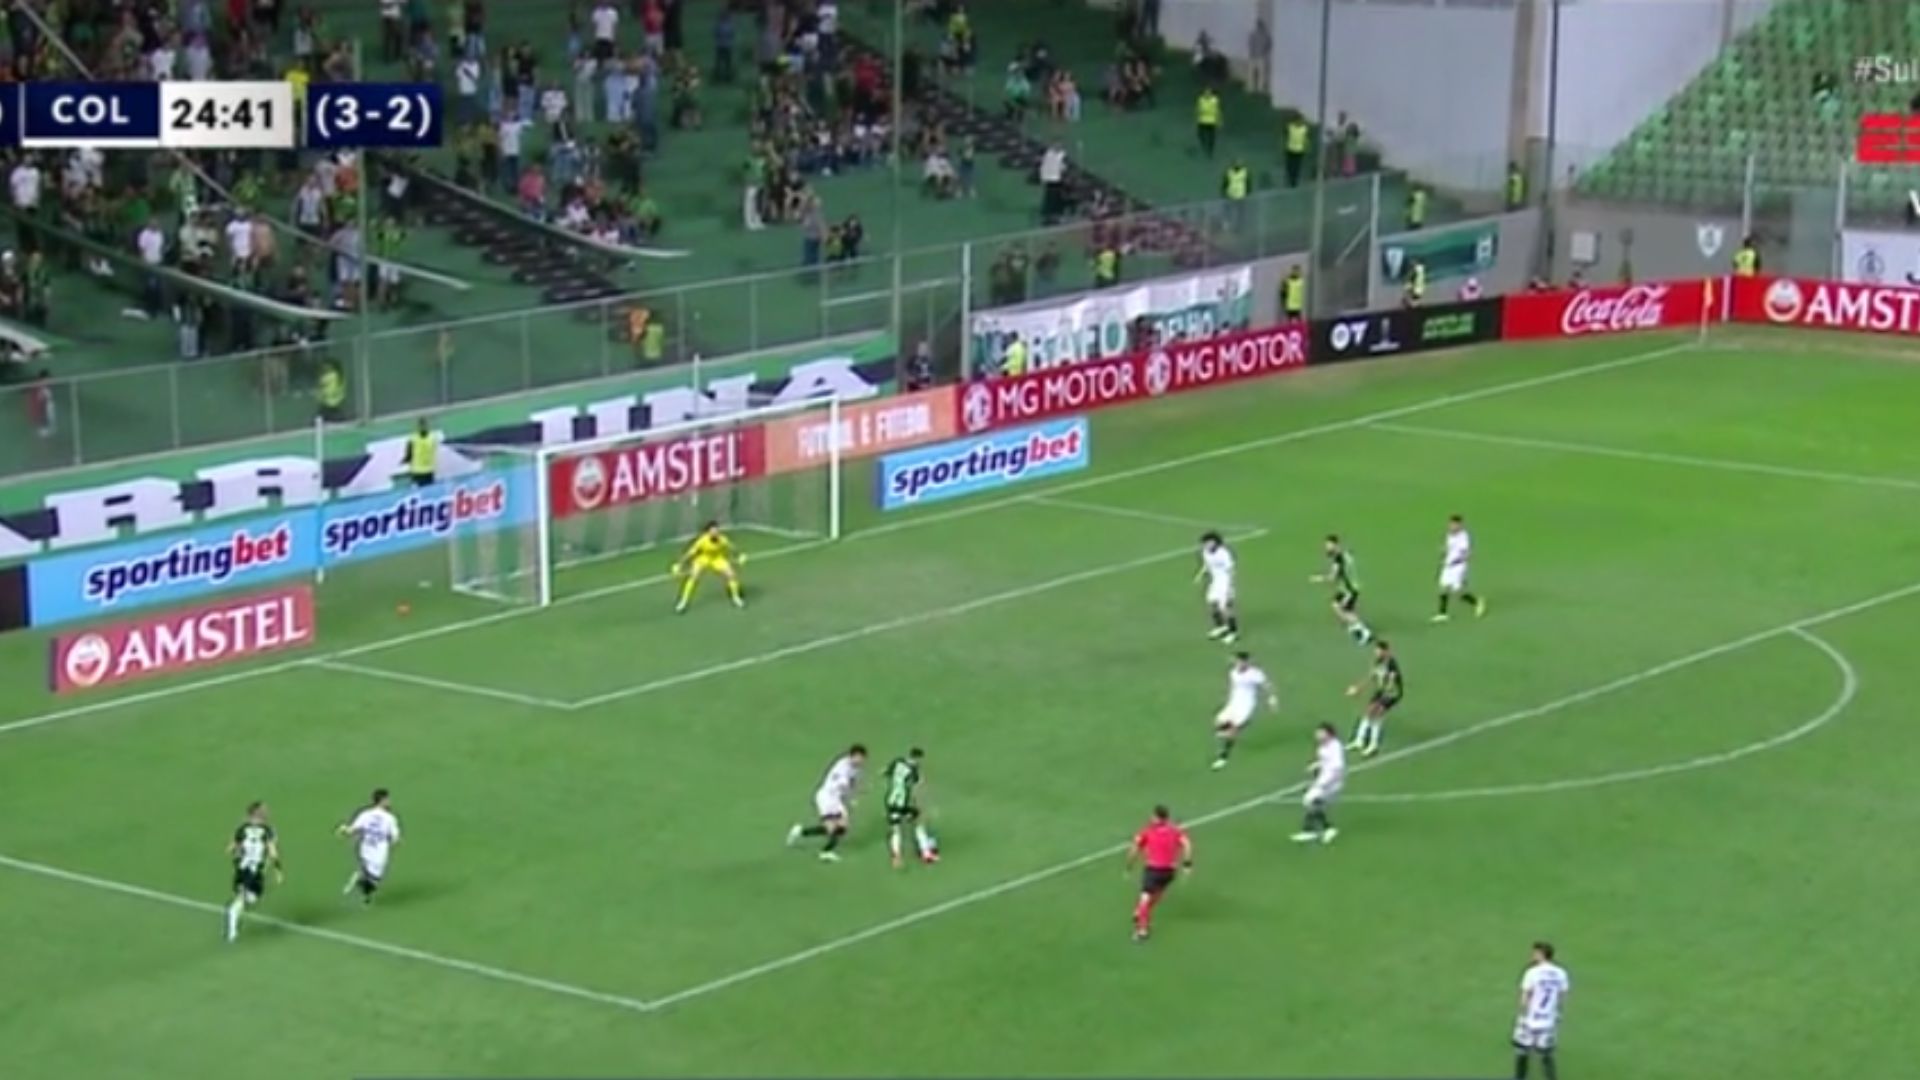 Moment of the third goal of América-MG